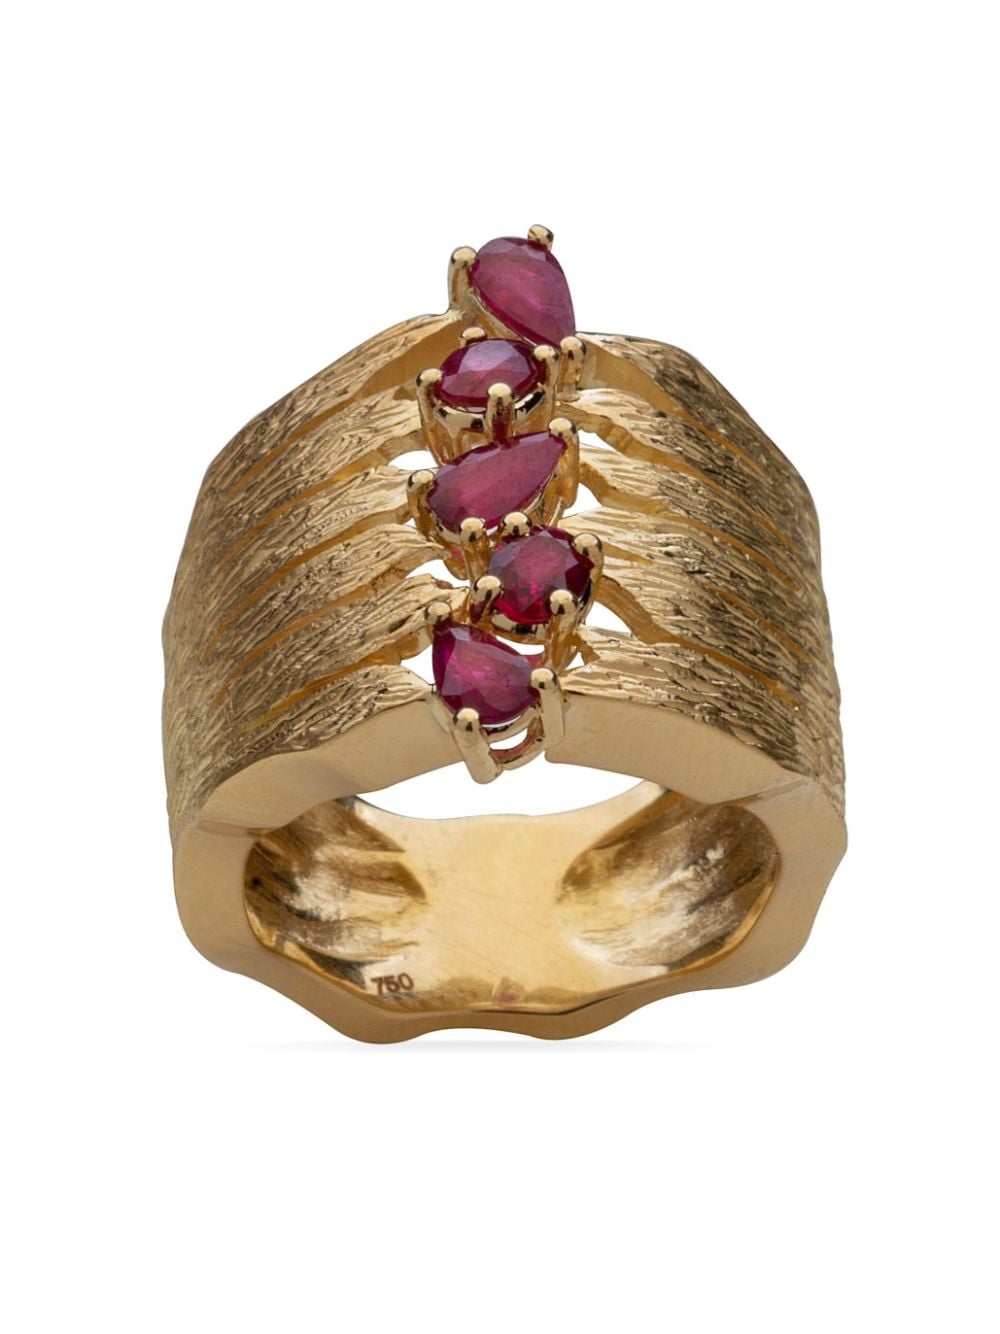 Image 1 of Gaelle Khouri 18kt yellow gold Côte a Côte ruby ring